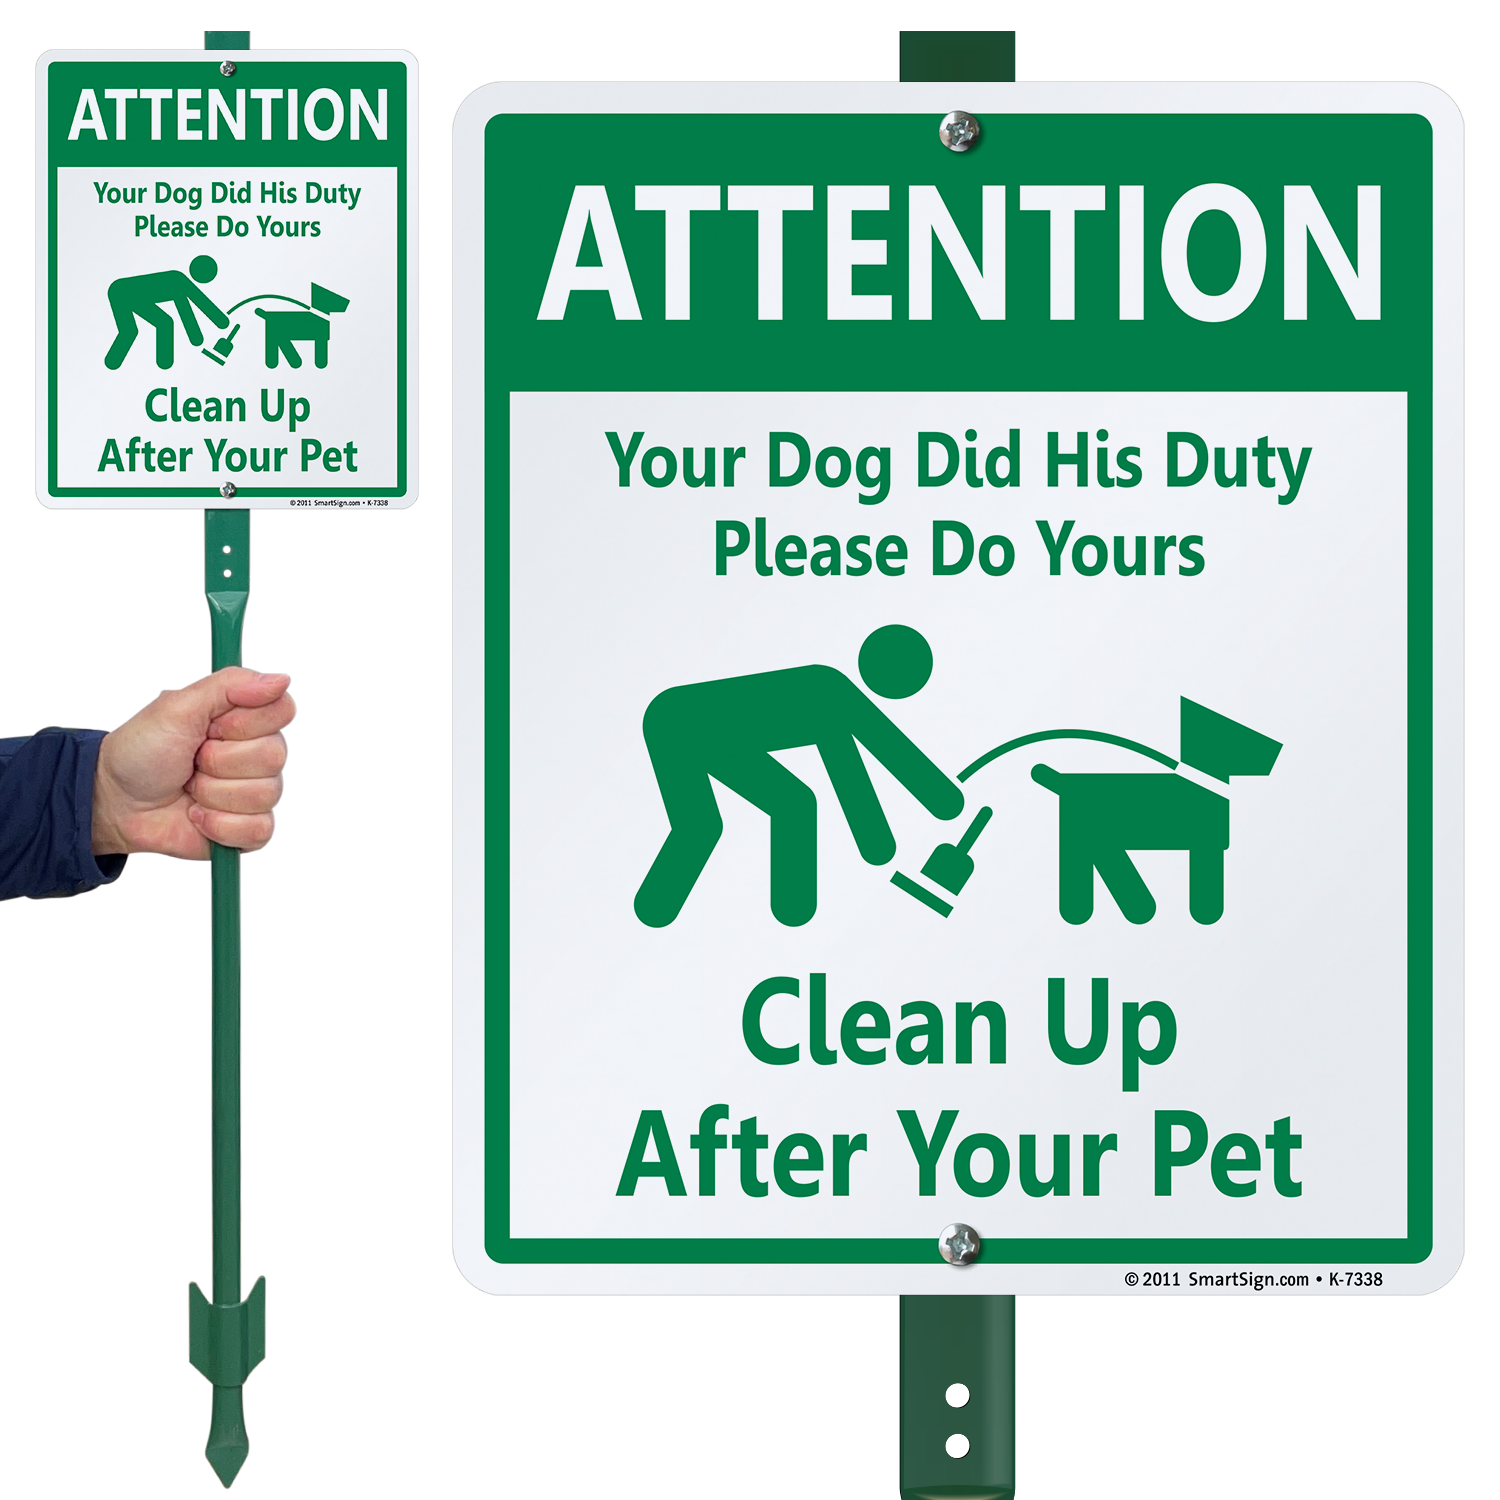 dog-poop-sign-attention-your-dog-did-his-duty-do-yours-sign